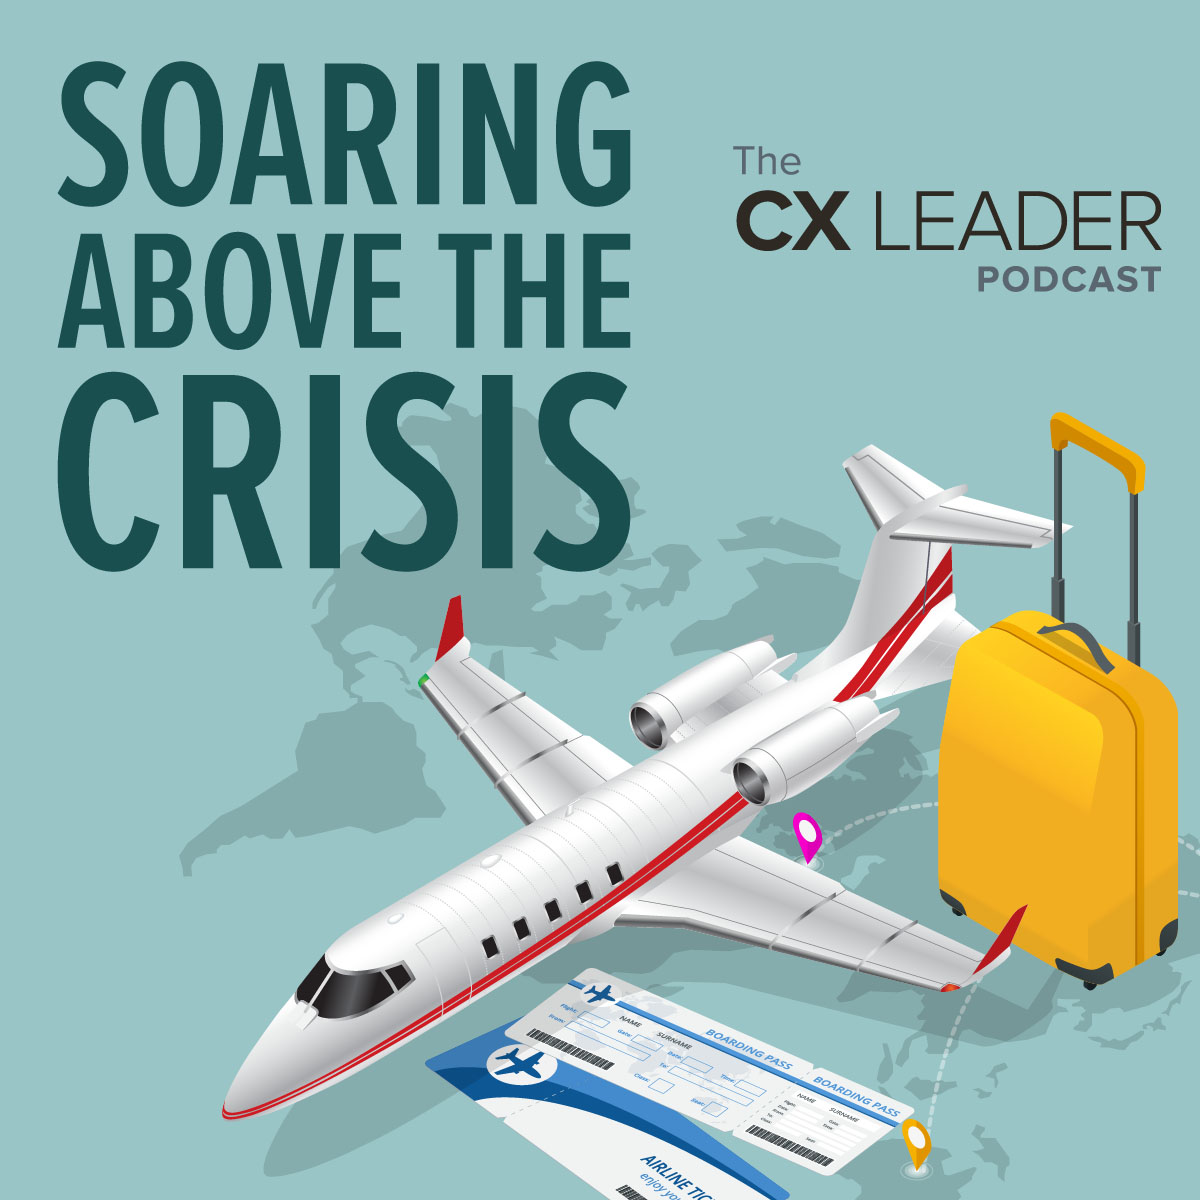 Soaring Above the Crisis